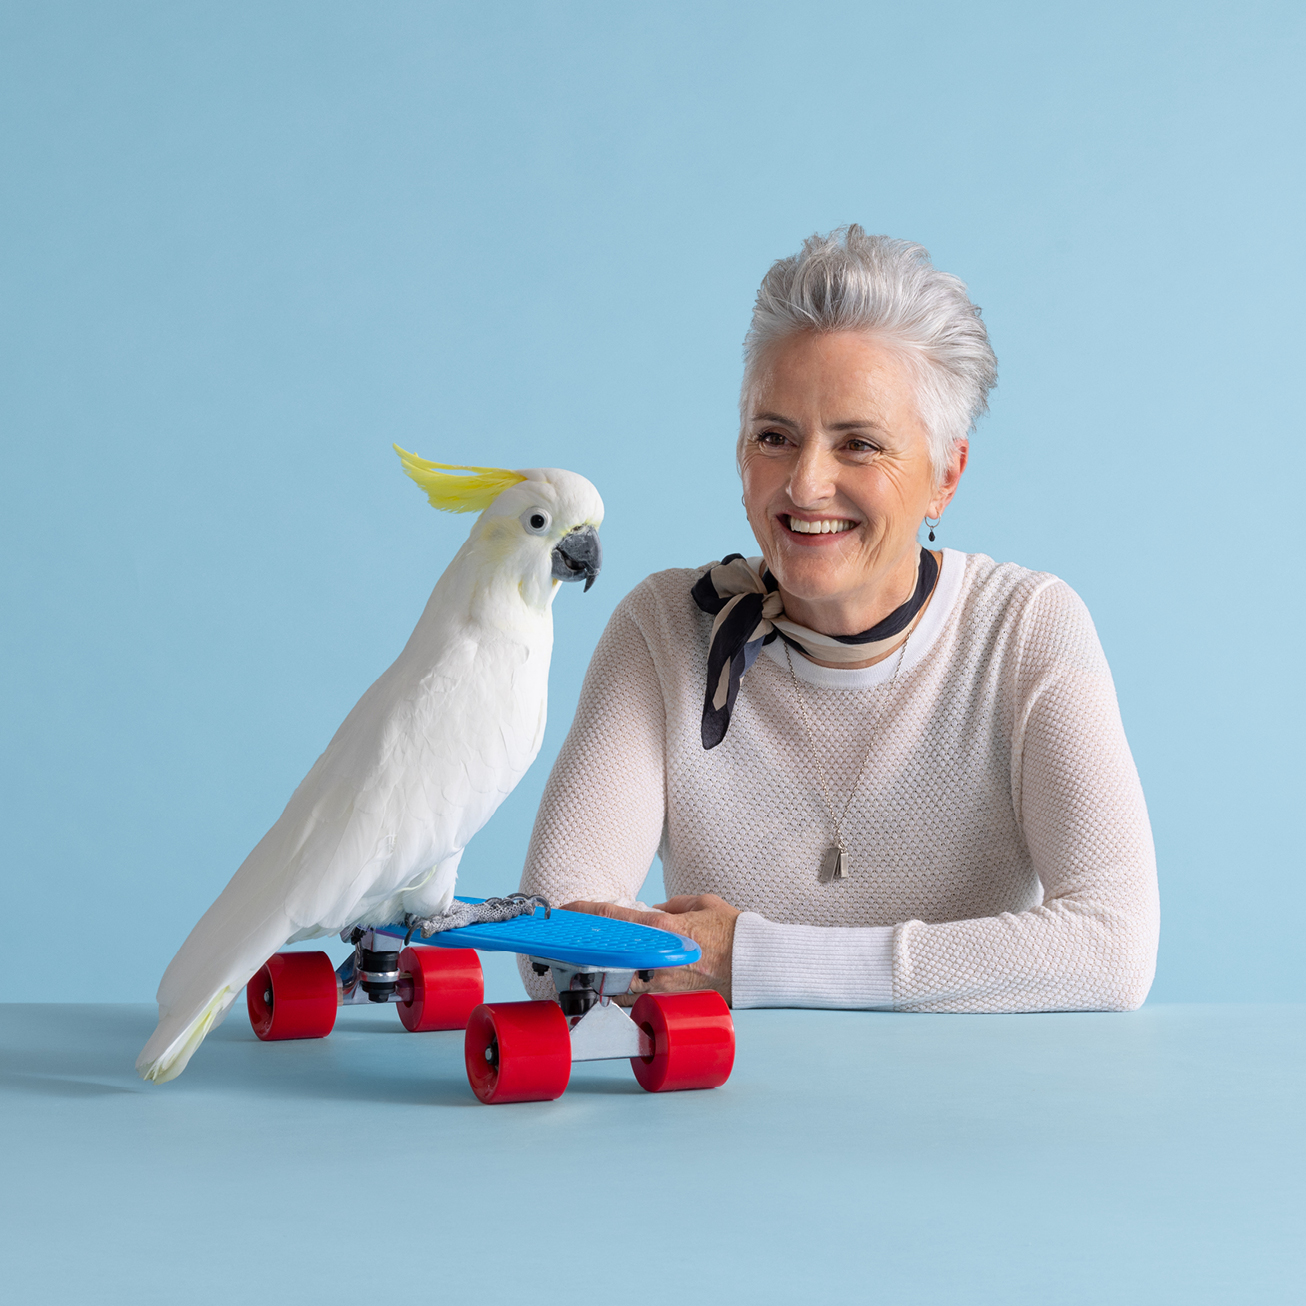 Lady looking at cockatiel that is perched on a skateboard